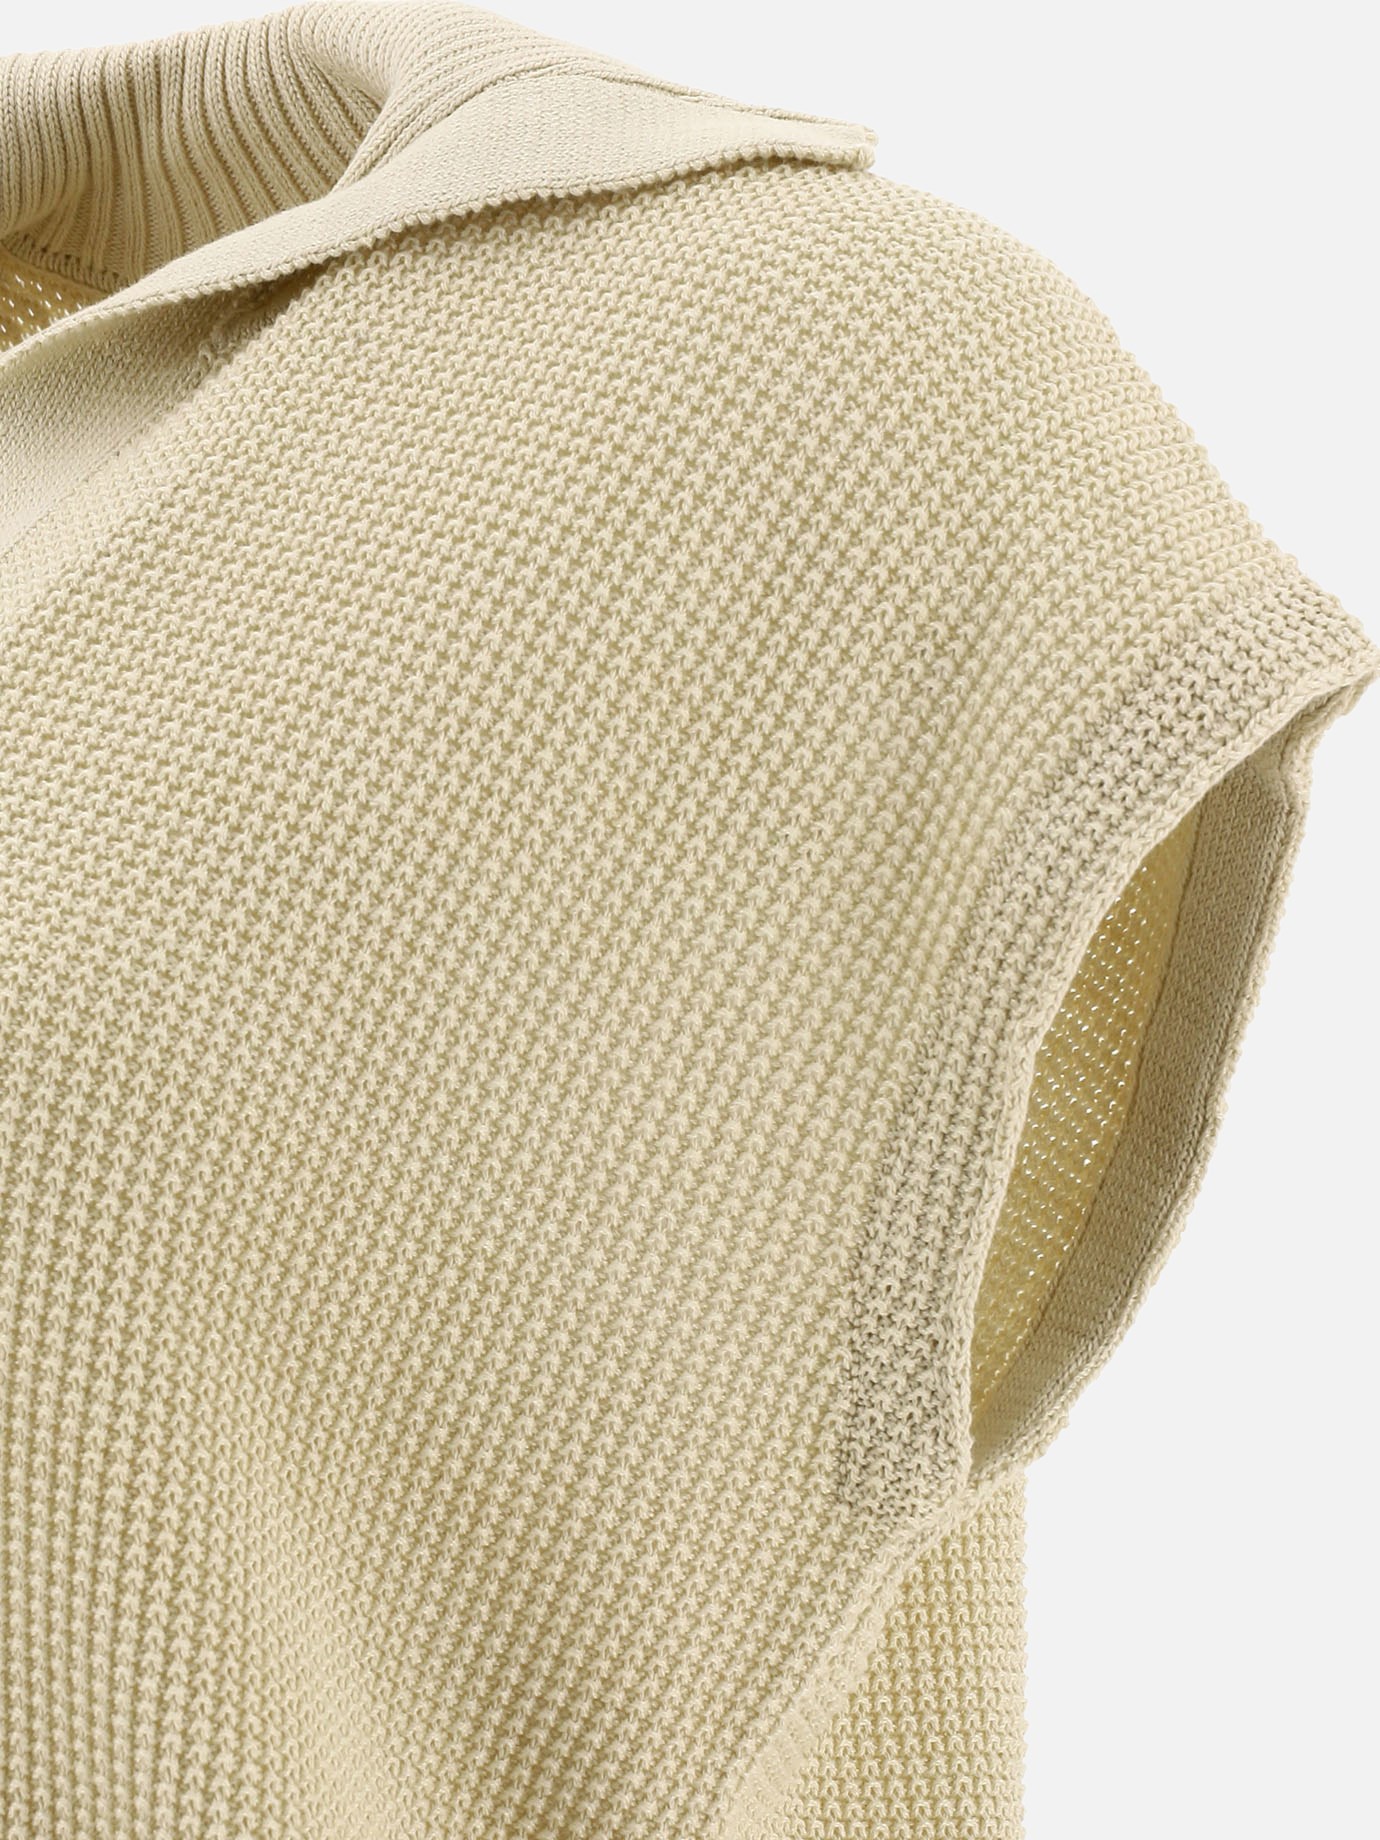 Sleeveless sweater with collar by Roberto Collina